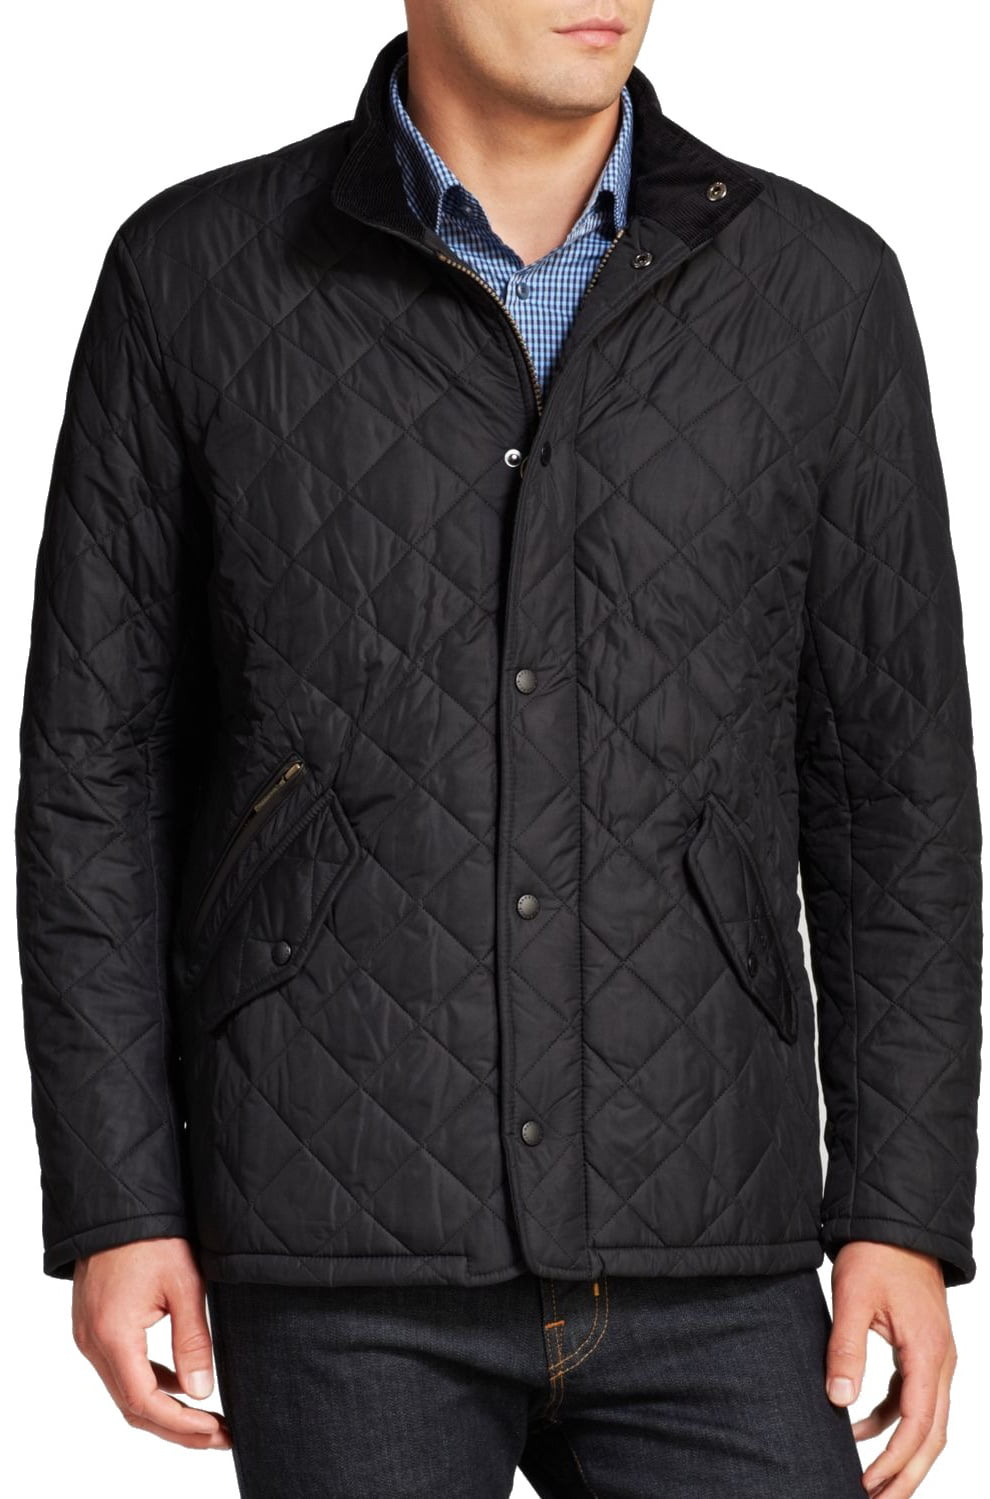 Barbour - Barbour NEW Black Mens Size Large L Full Zip Sports Quilted ...